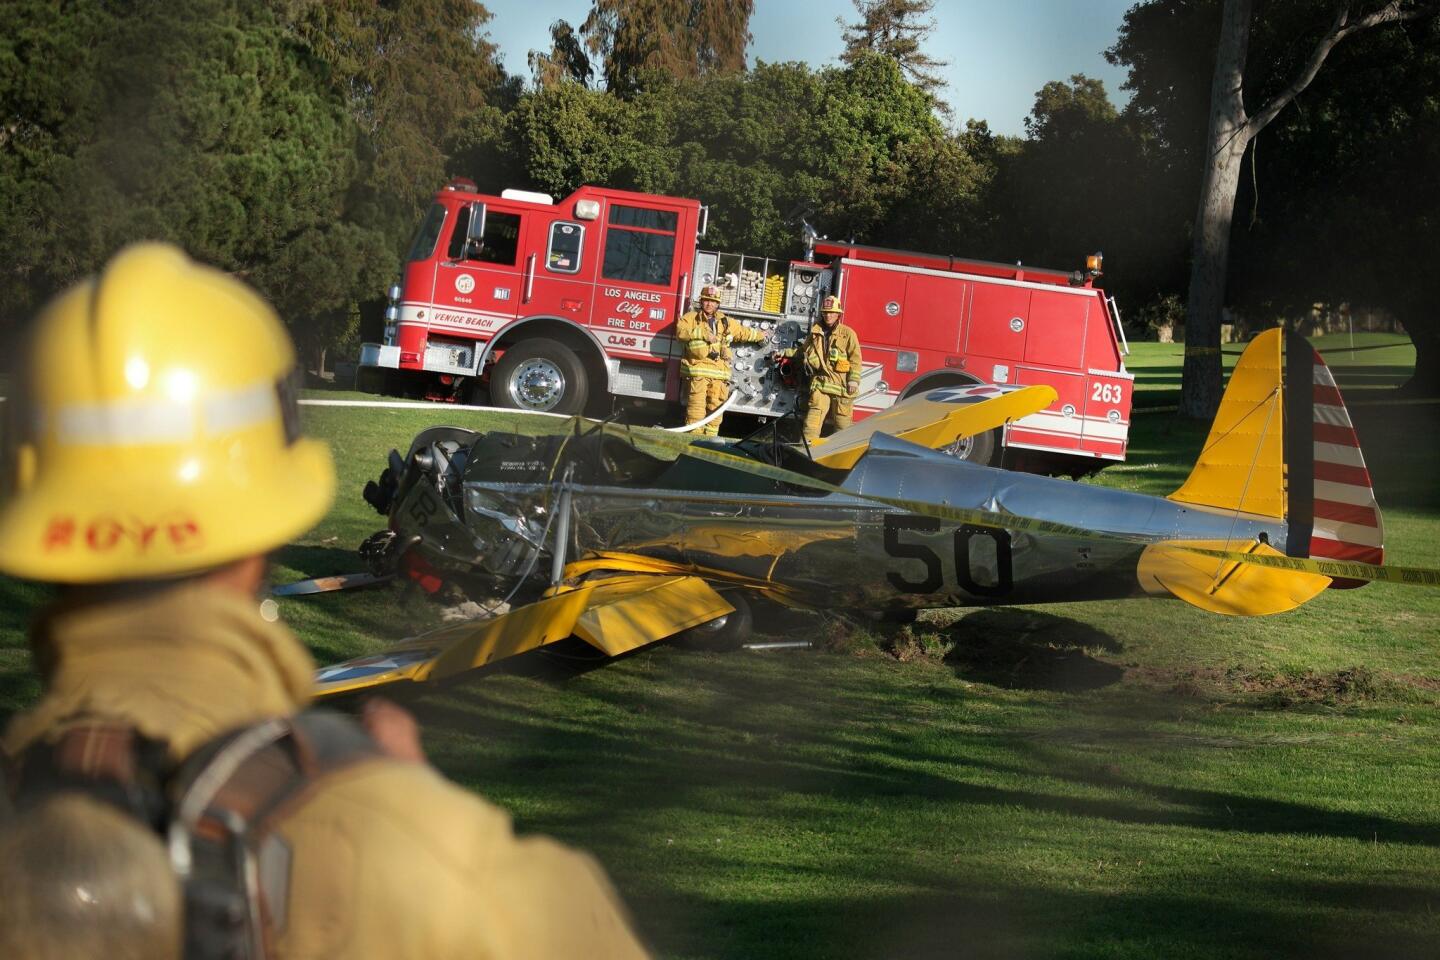 The small plane owned by actor Harrison Ford is seen after crashing at the Penmar Golf Course in Venice, Calif.